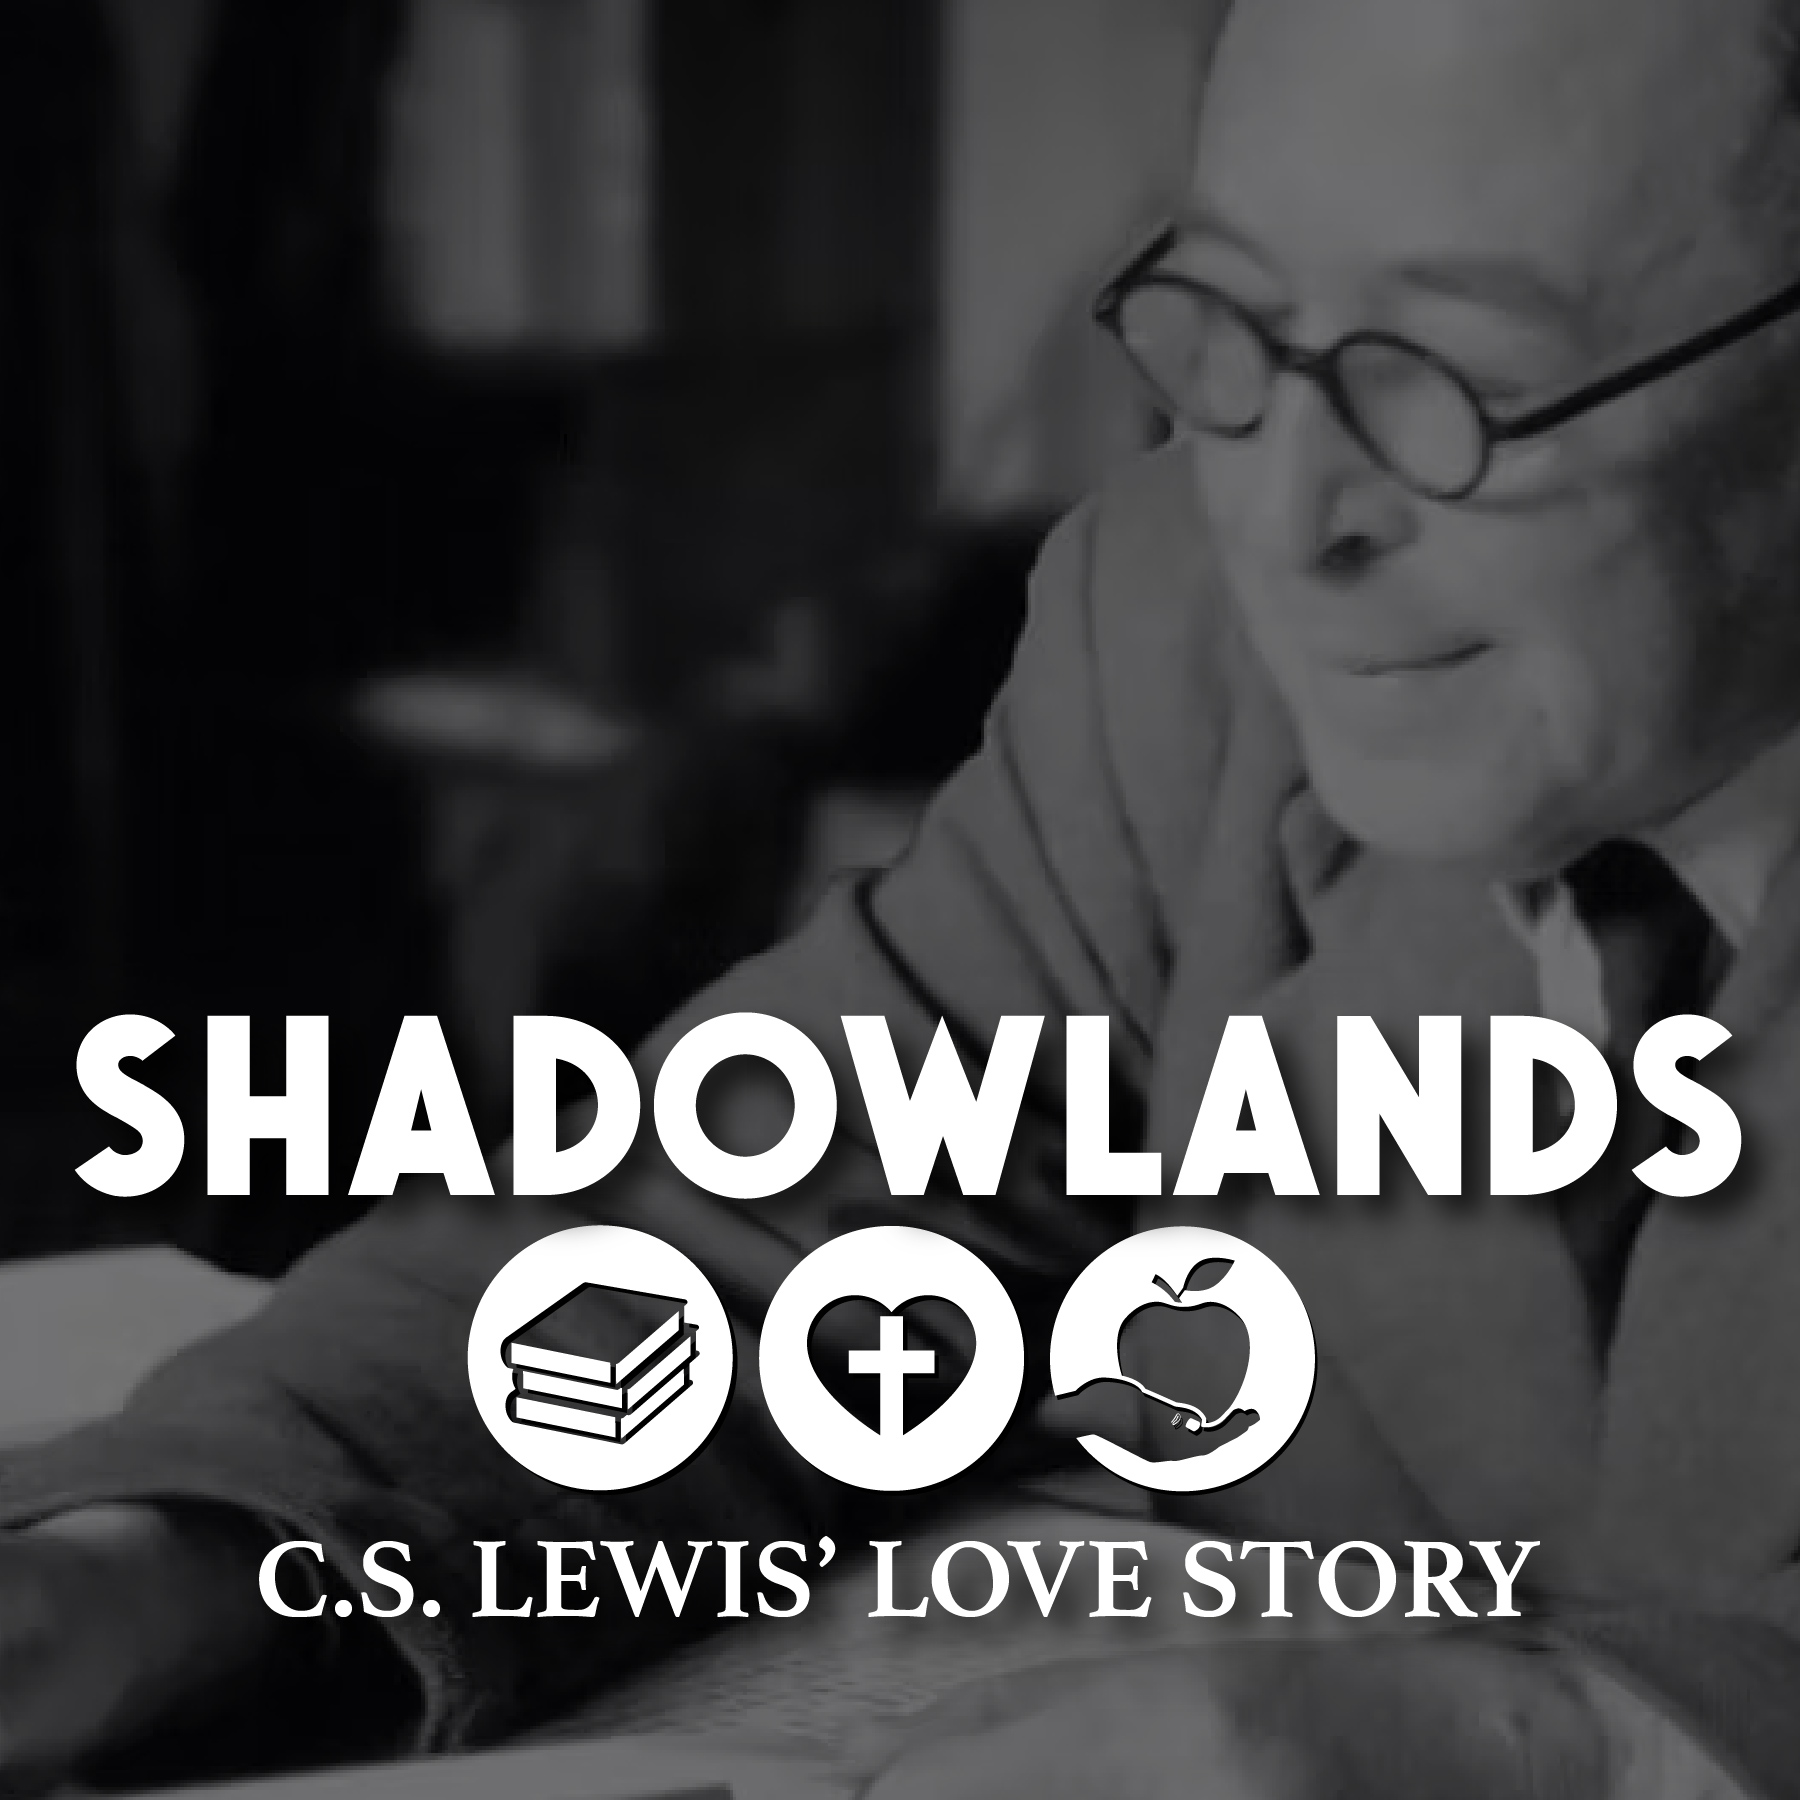 C.S. Lewis with Shadowlands logo